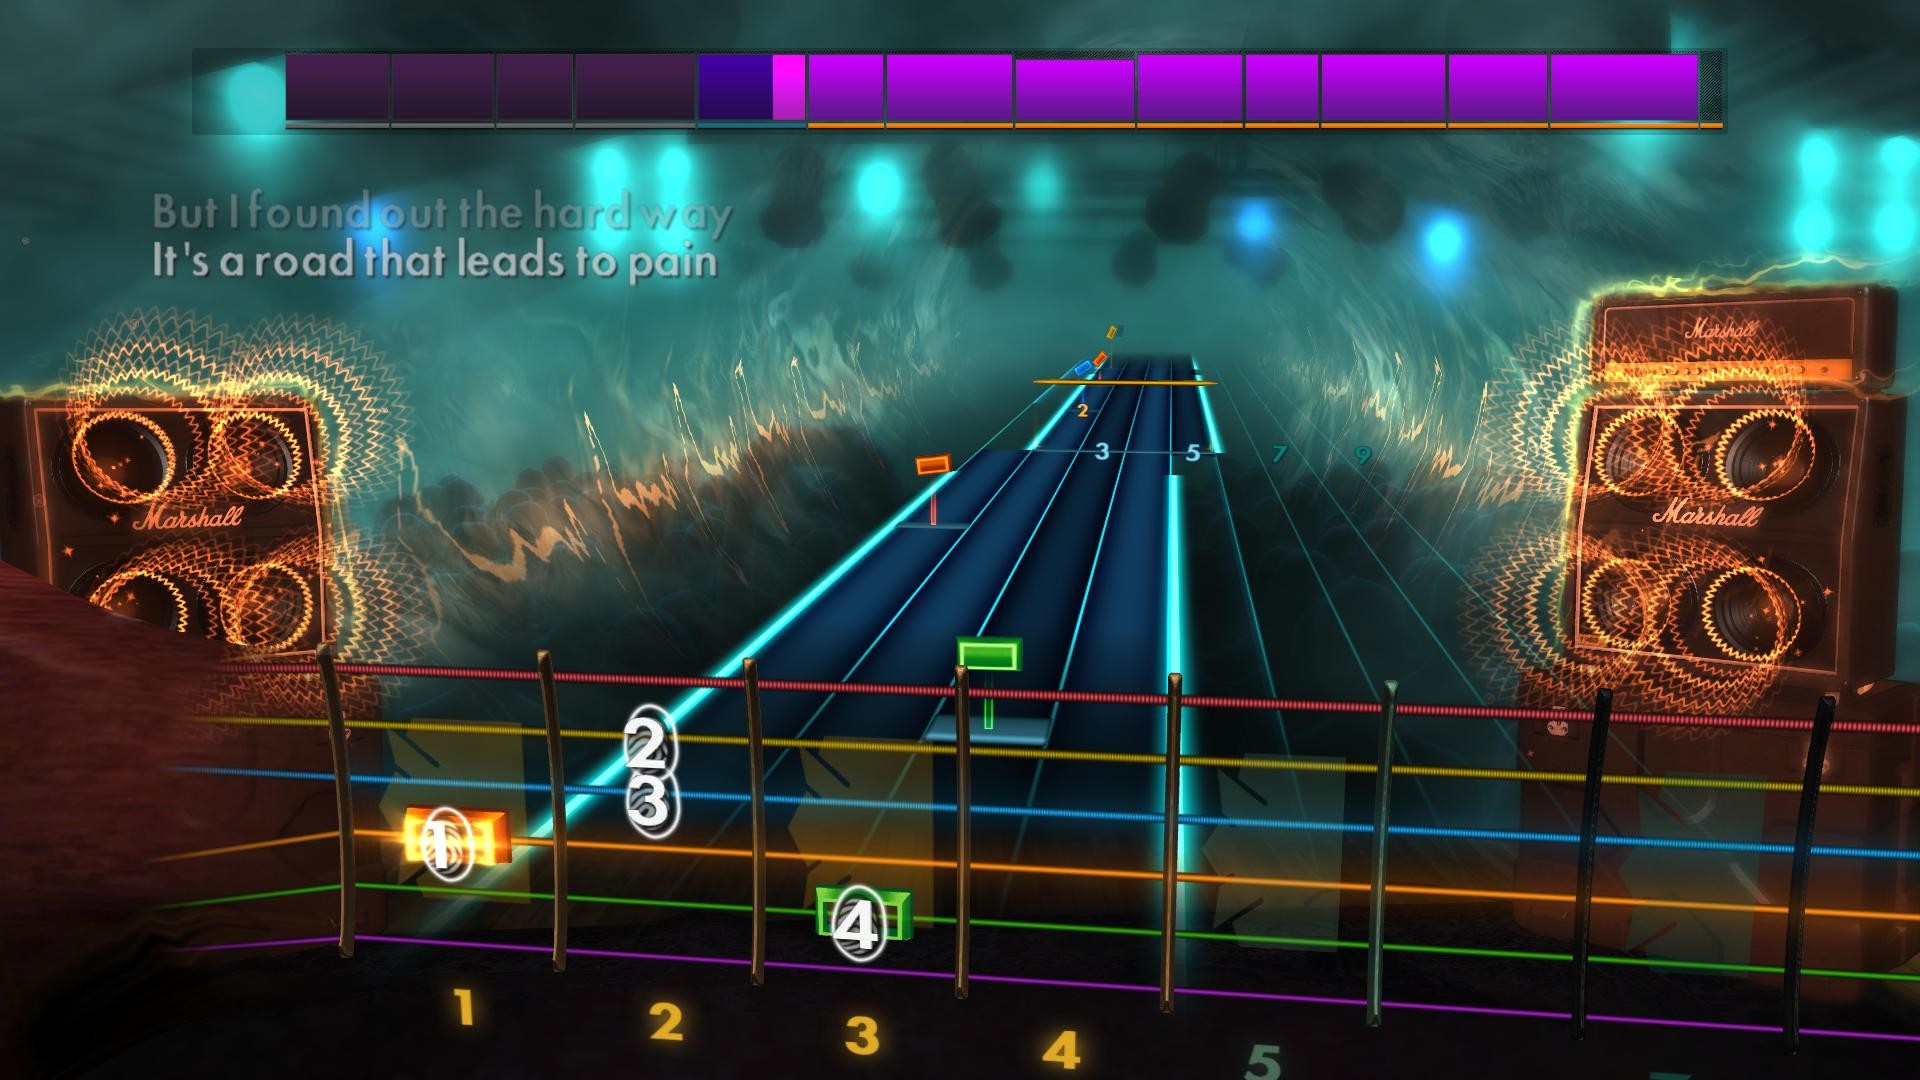 Rocksmith 2014 Edition – Remastered – Gary Moore - “Over the Hills and Far Away” screenshot